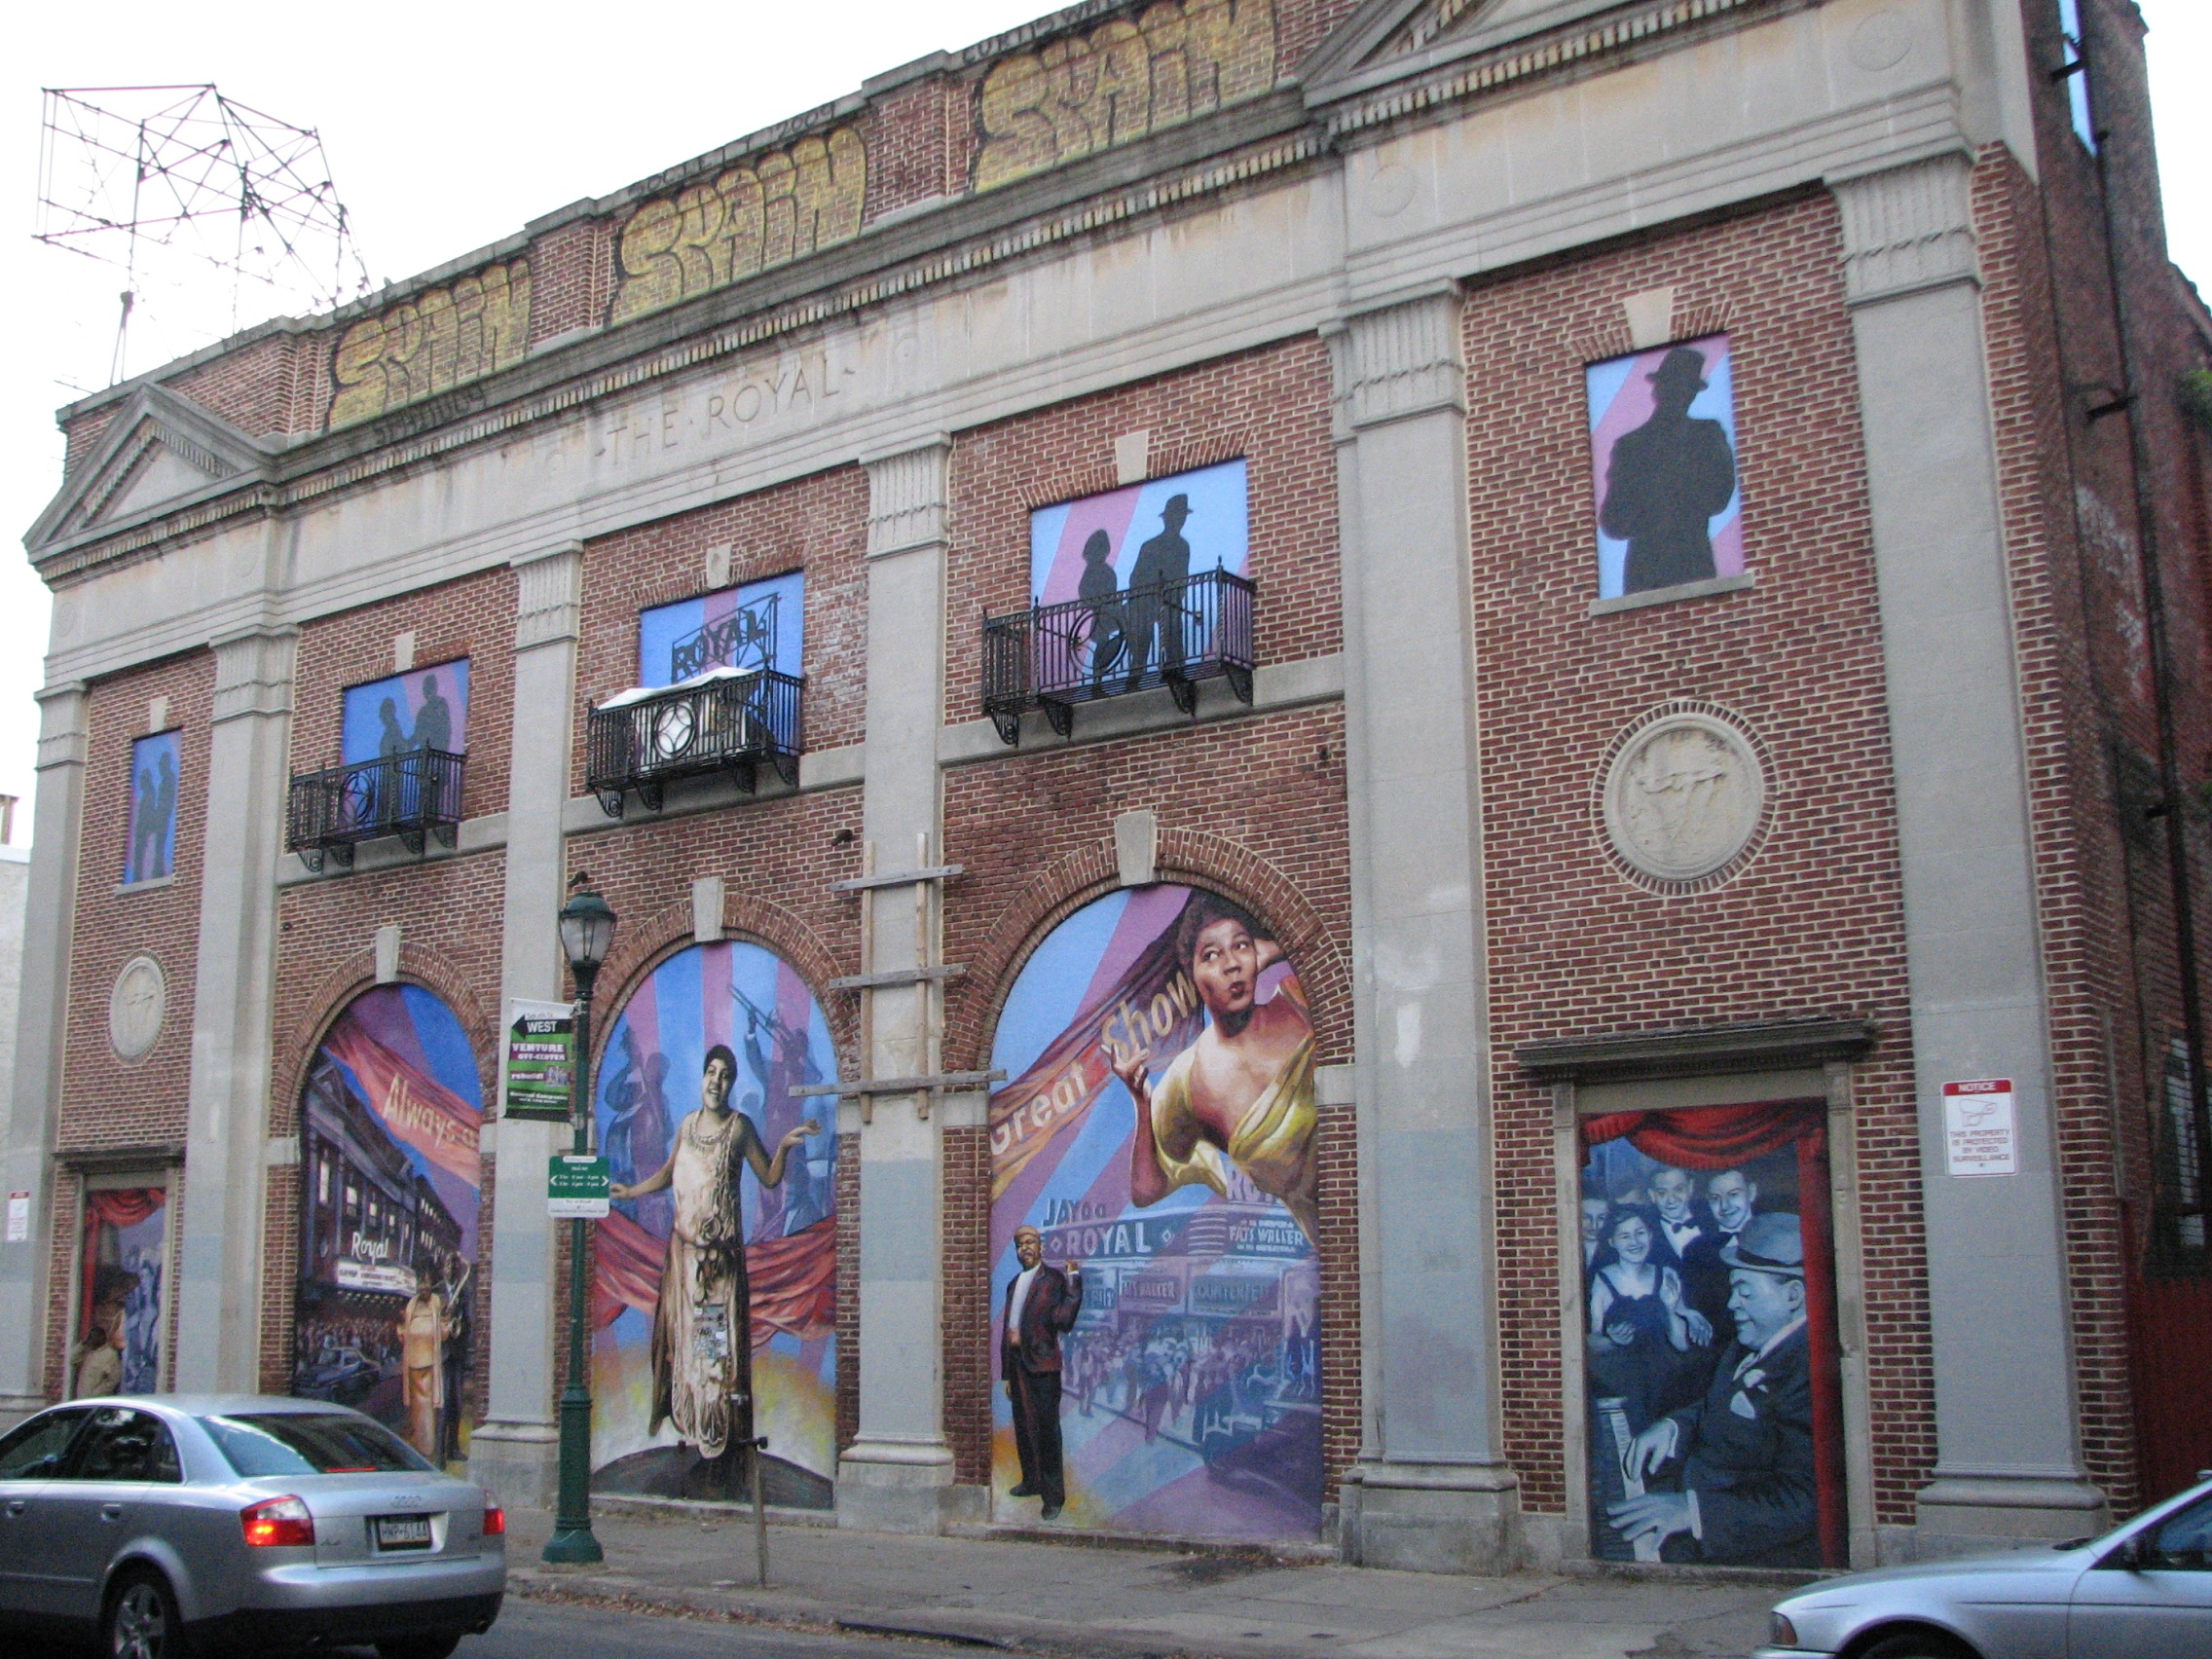 The entire theater building was designated historic in 1978, and an easement added another layer of protection to the facade.